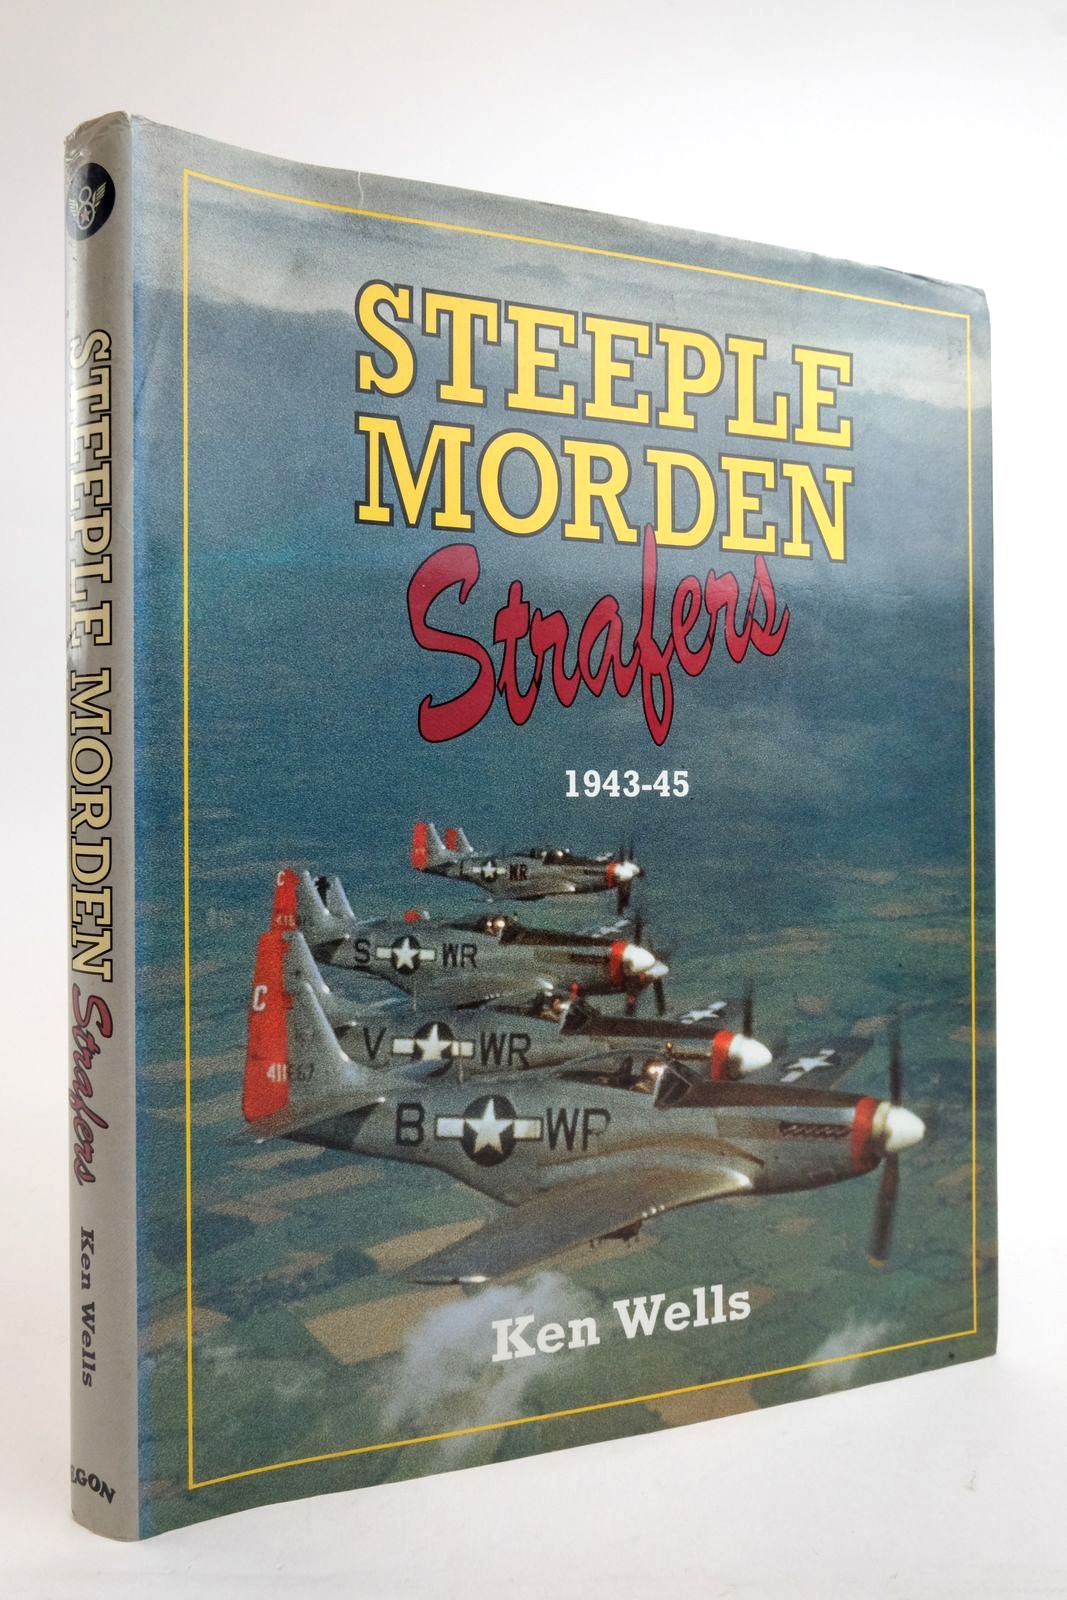 Photo of STEEPLE MORDEN STRAFERS 1943-45 written by Wells, Ken published by Egon Publishers (STOCK CODE: 2136277)  for sale by Stella & Rose's Books